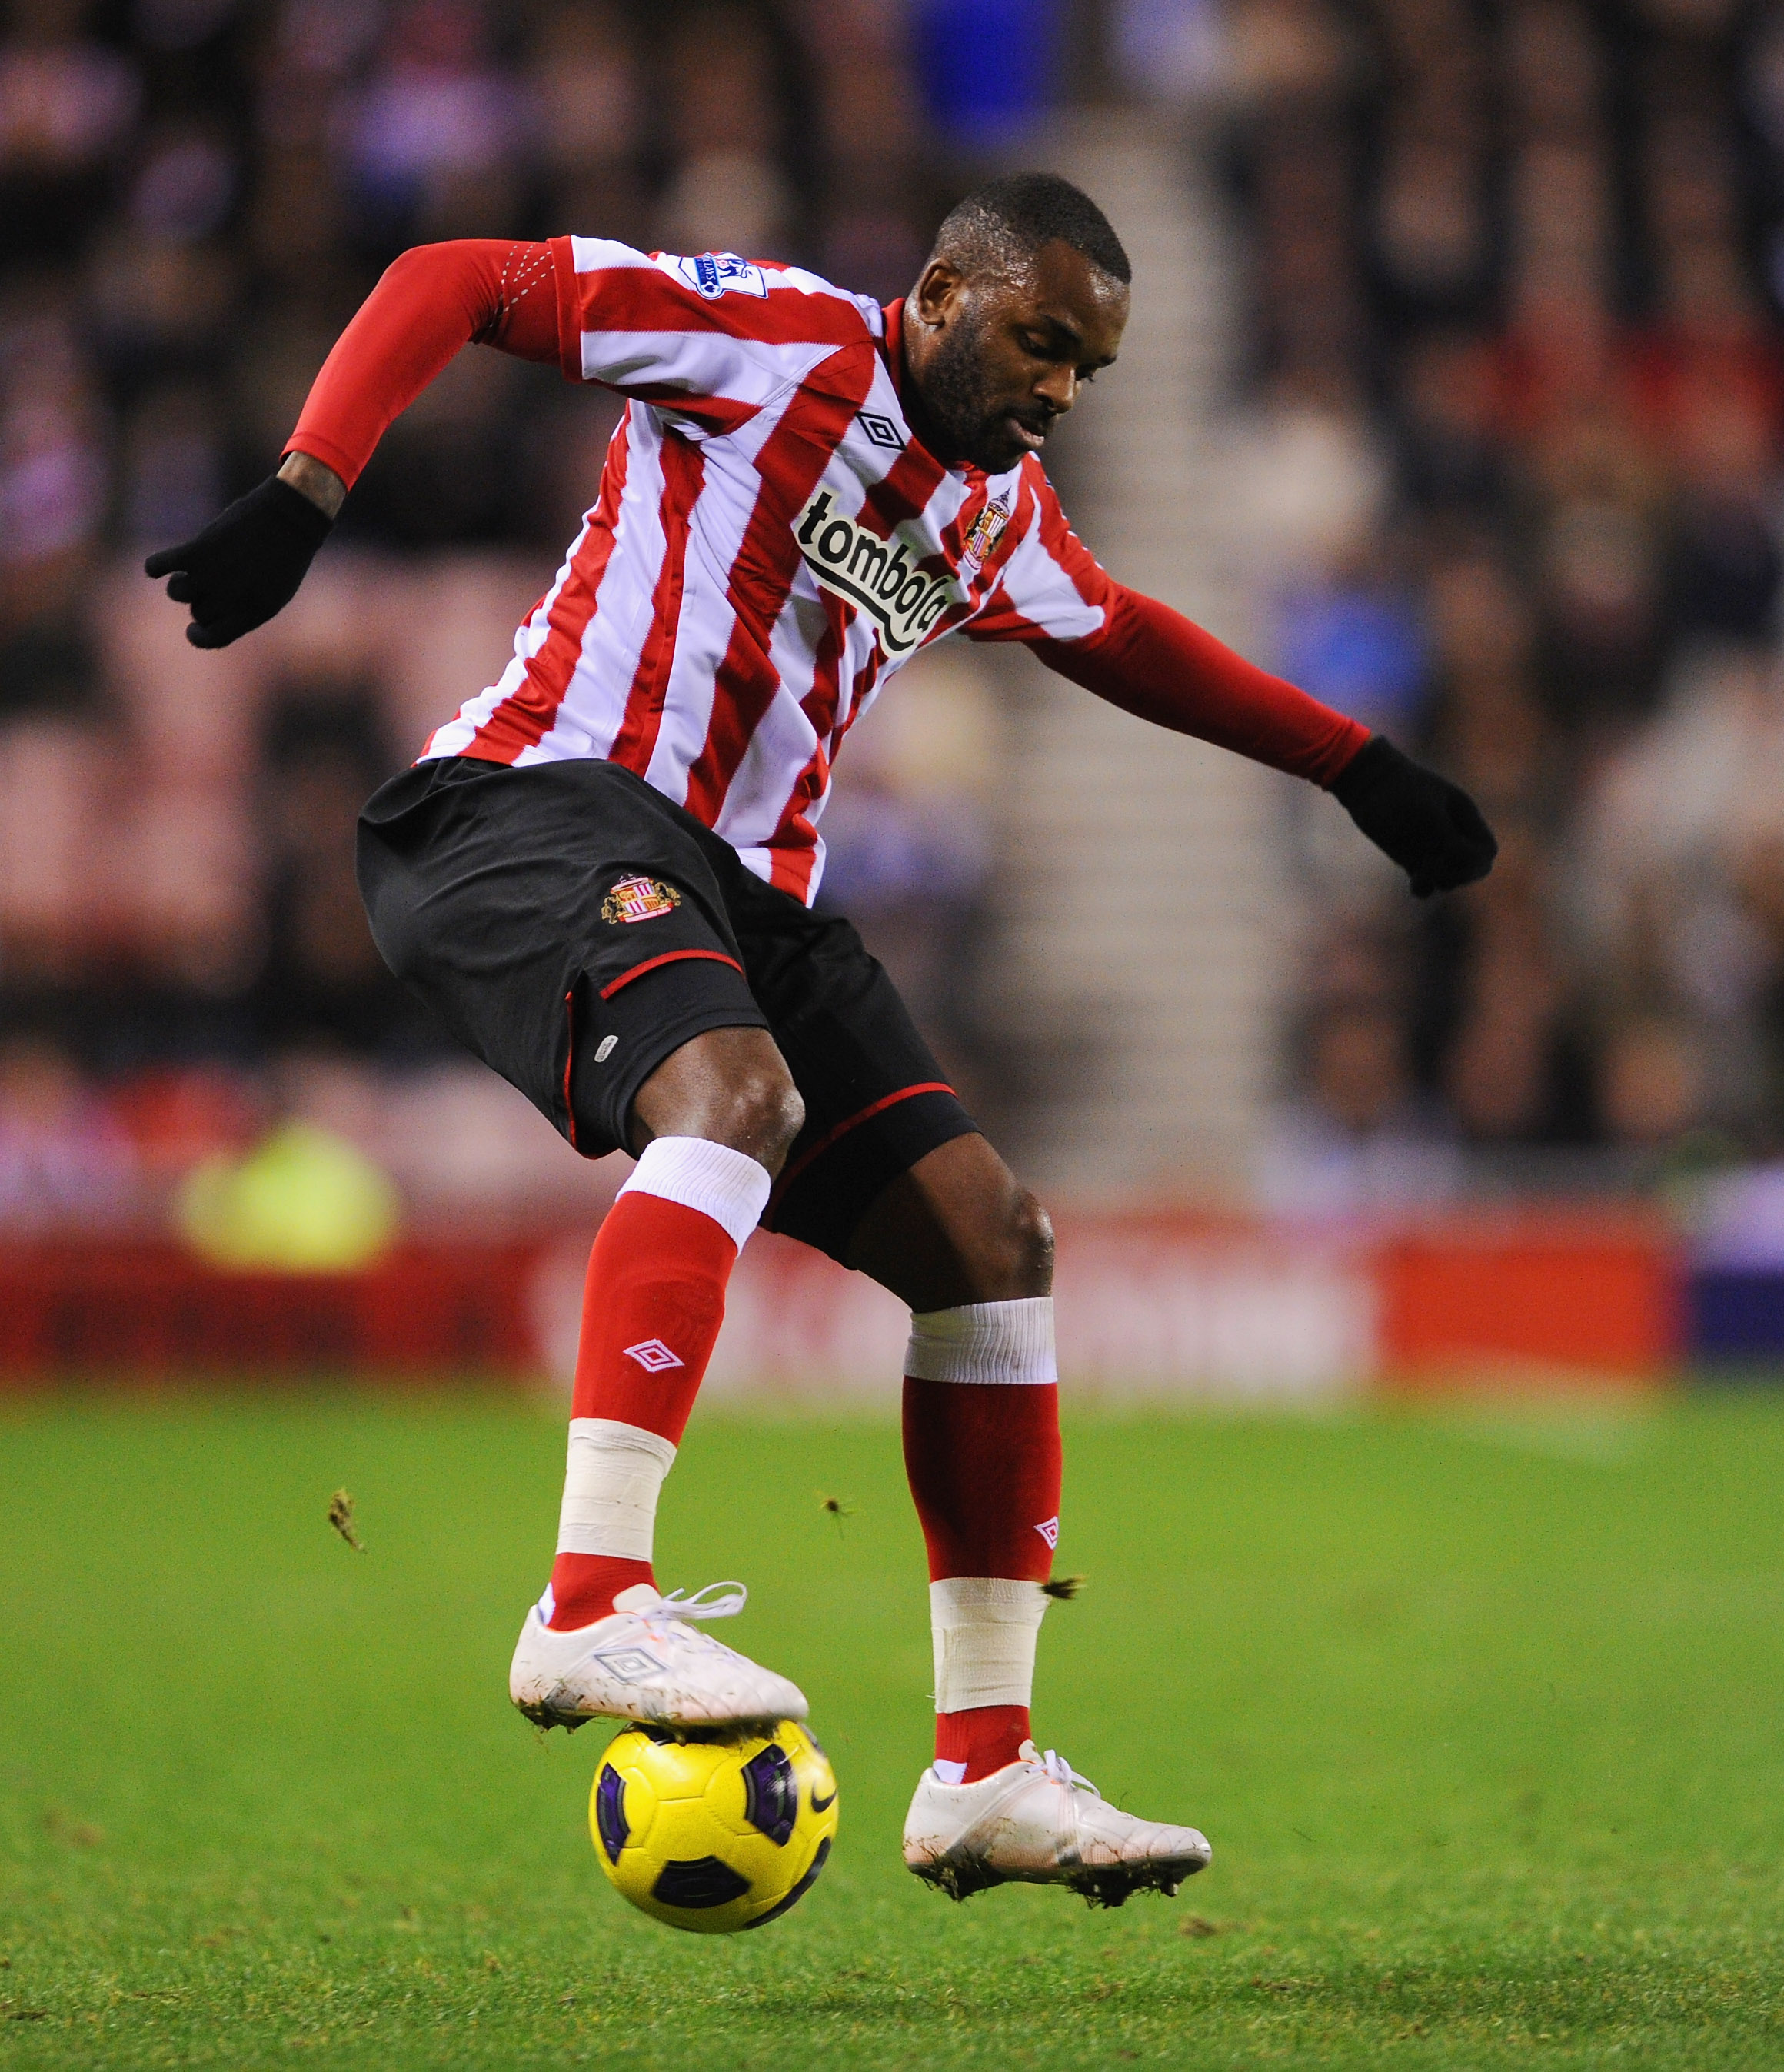 SUNDERLAND, ENGLAND - NOVEMBER 22: Darren Bent of Sunderland on the ball during the Barclays Premier League match between Sunderland and Everton at the Stadium of Light on November 22, 2010 in Sunderland, England.  (Photo by Michael Regan/Getty Images)